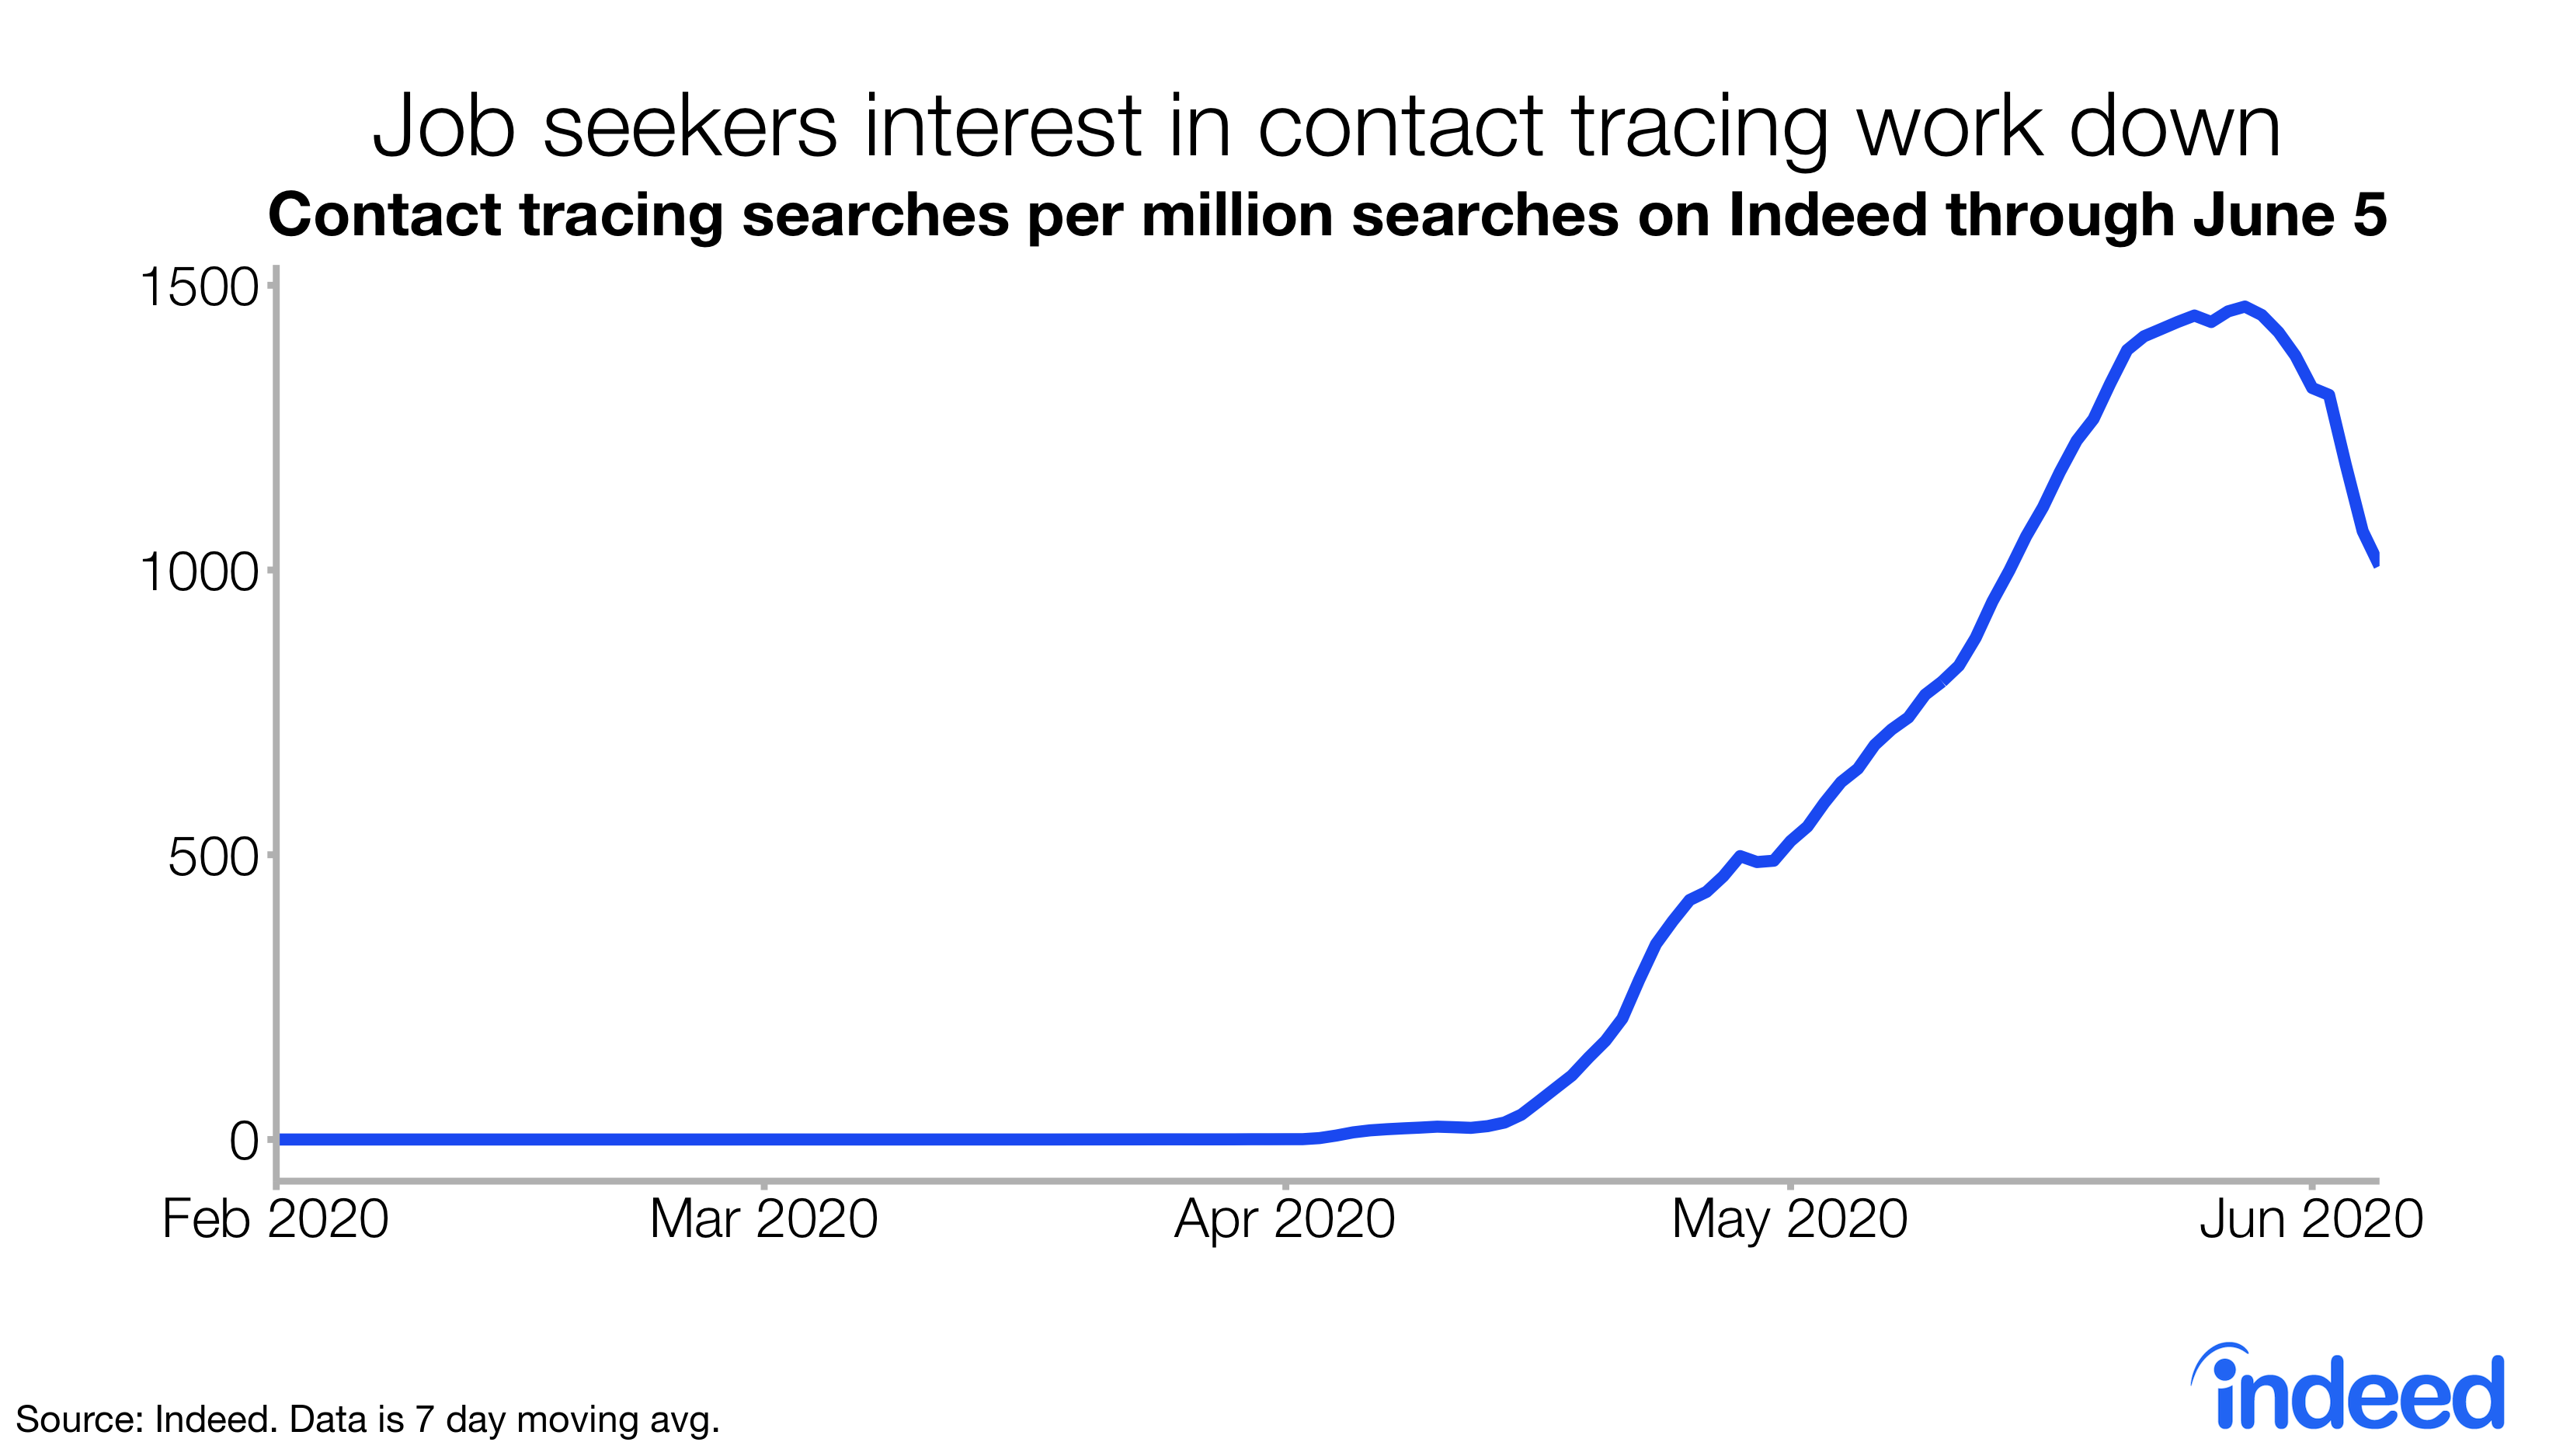 Line graph entitled “Job seekers interest in contact tracing work down”. With a vertical axis of 0 through 1500, the graph shows contract tracing searches per million searches on Indeed from February 2020 through June 5. There were 0 until April 2020, capping out in late May 2020 at 1500. As of June 5th, the searches were down to 1000 per million searches.